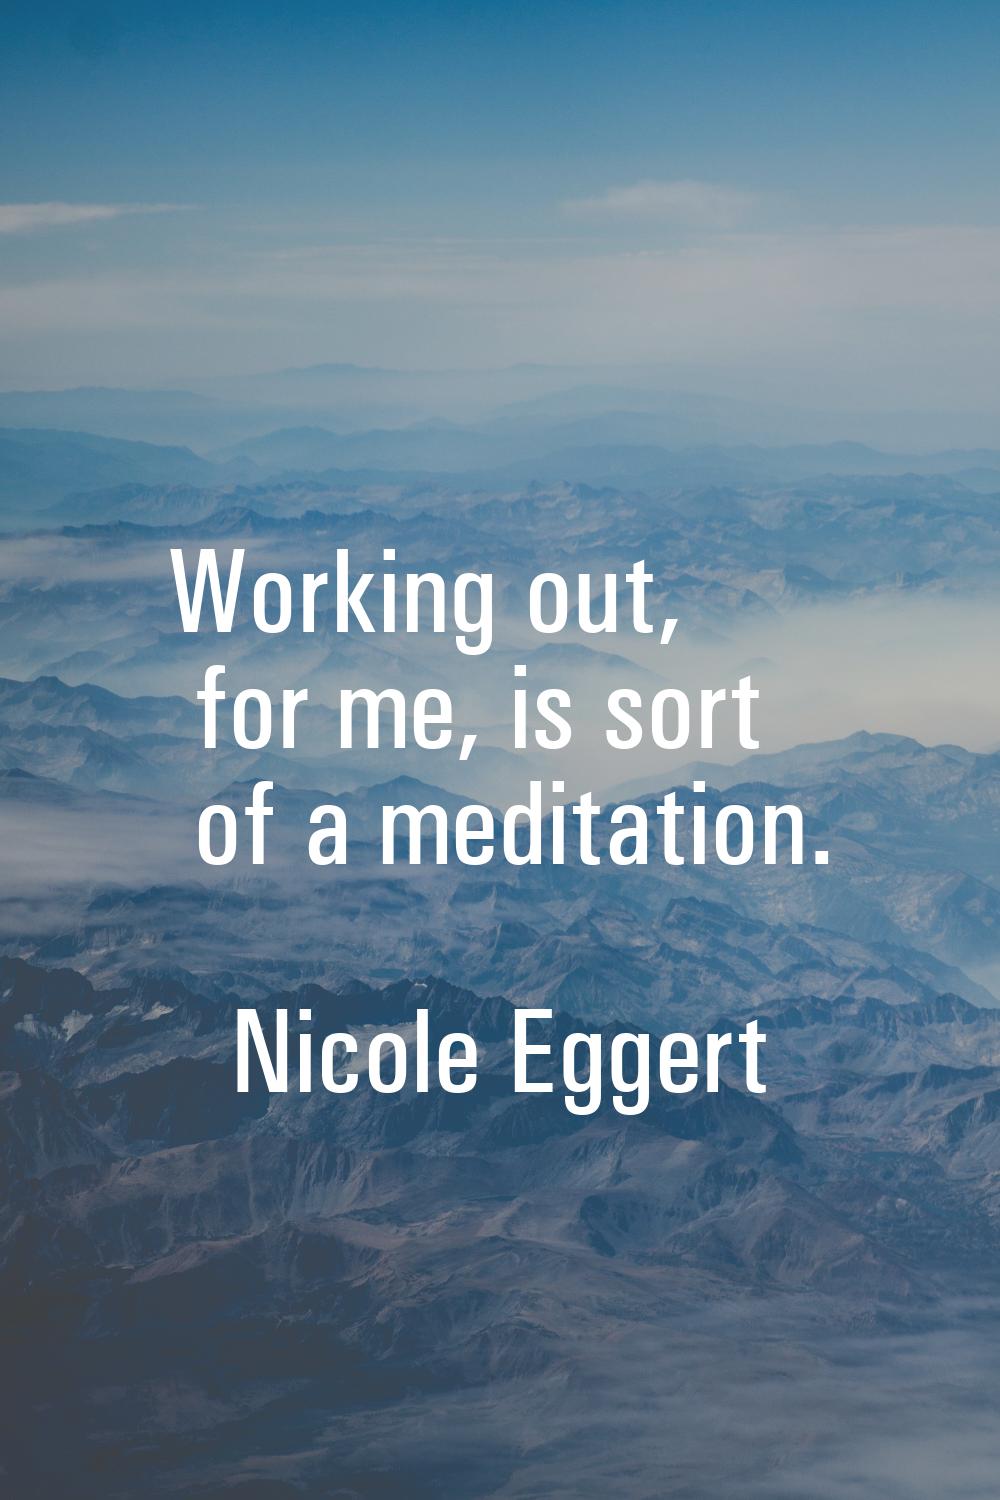 Working out, for me, is sort of a meditation.